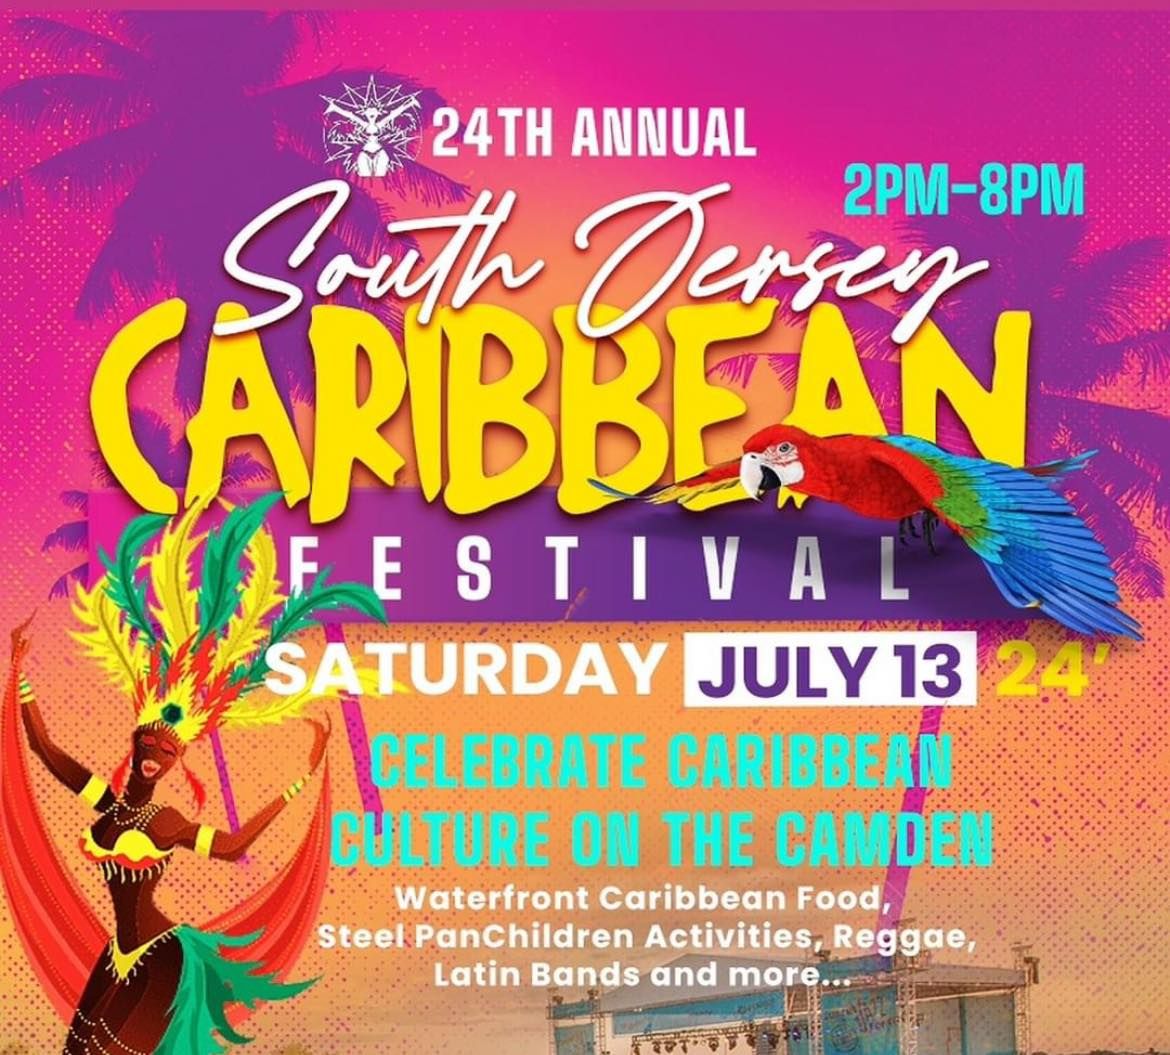 24th Annual South Jersey Caribbean Festival